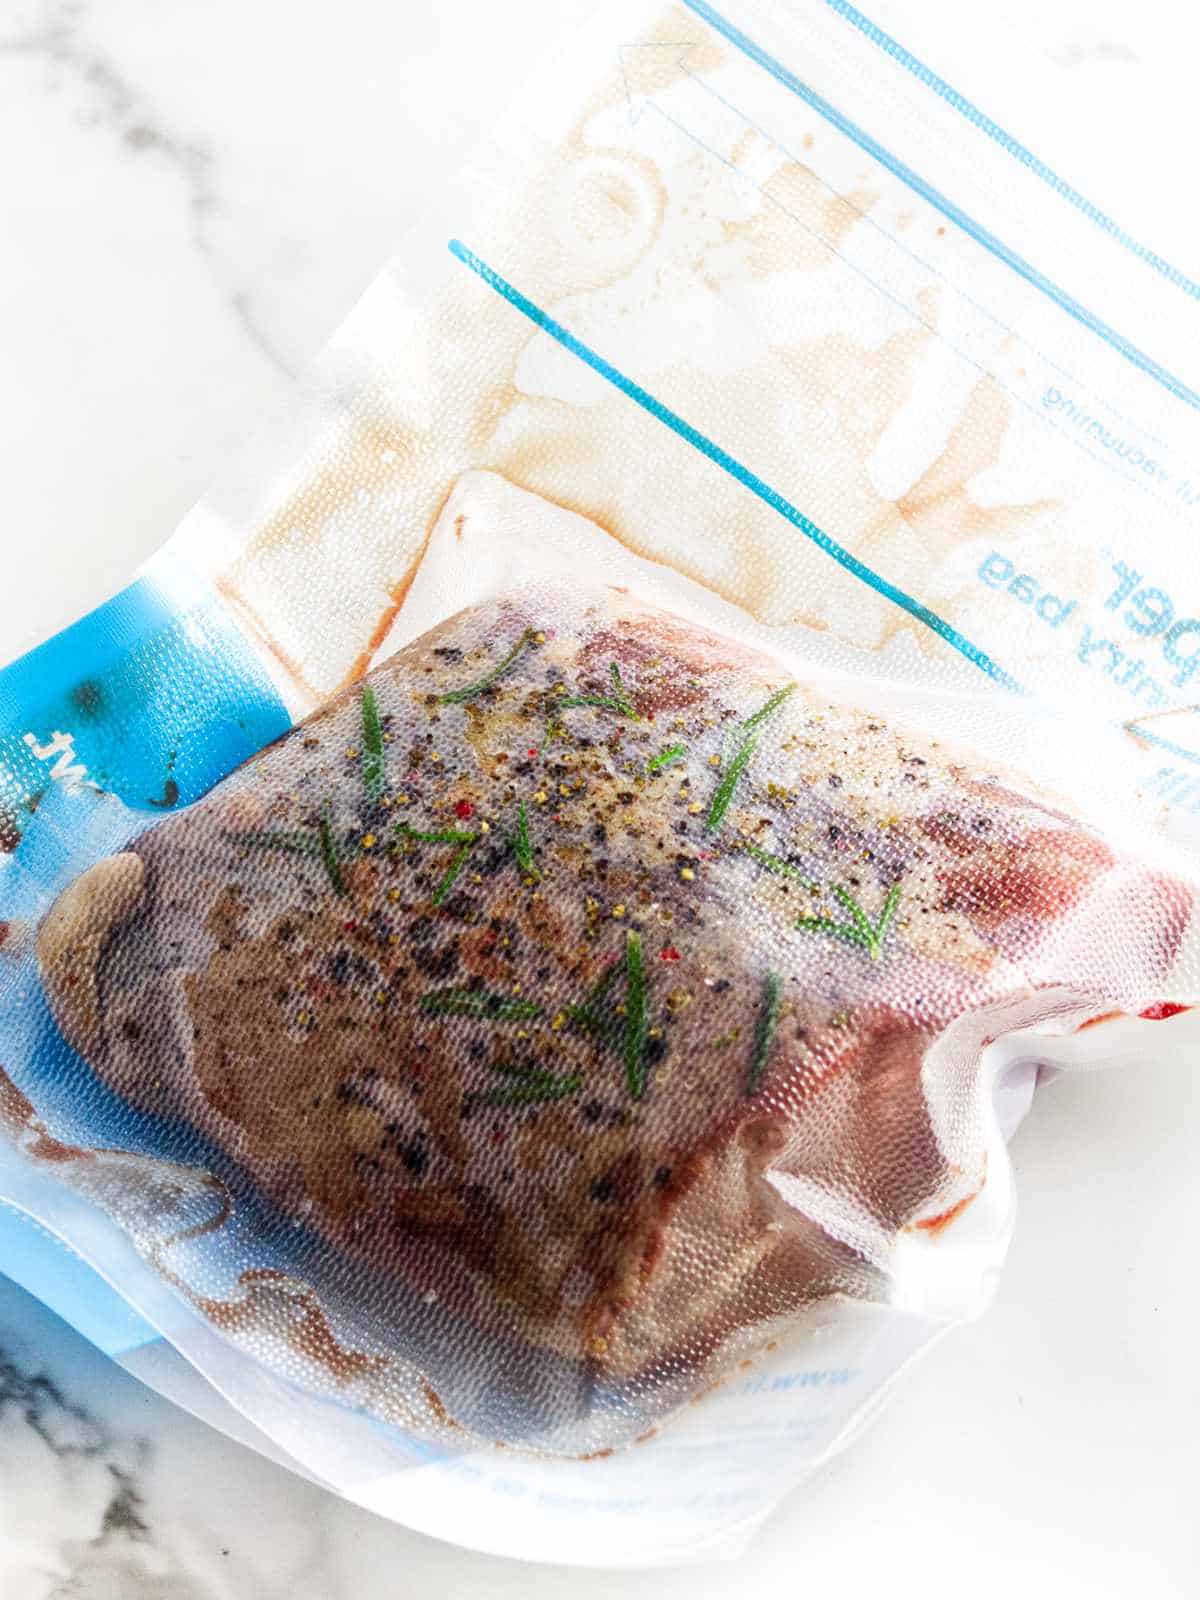 raw beef roast in a sous vide bag with rosemary and seasonings.